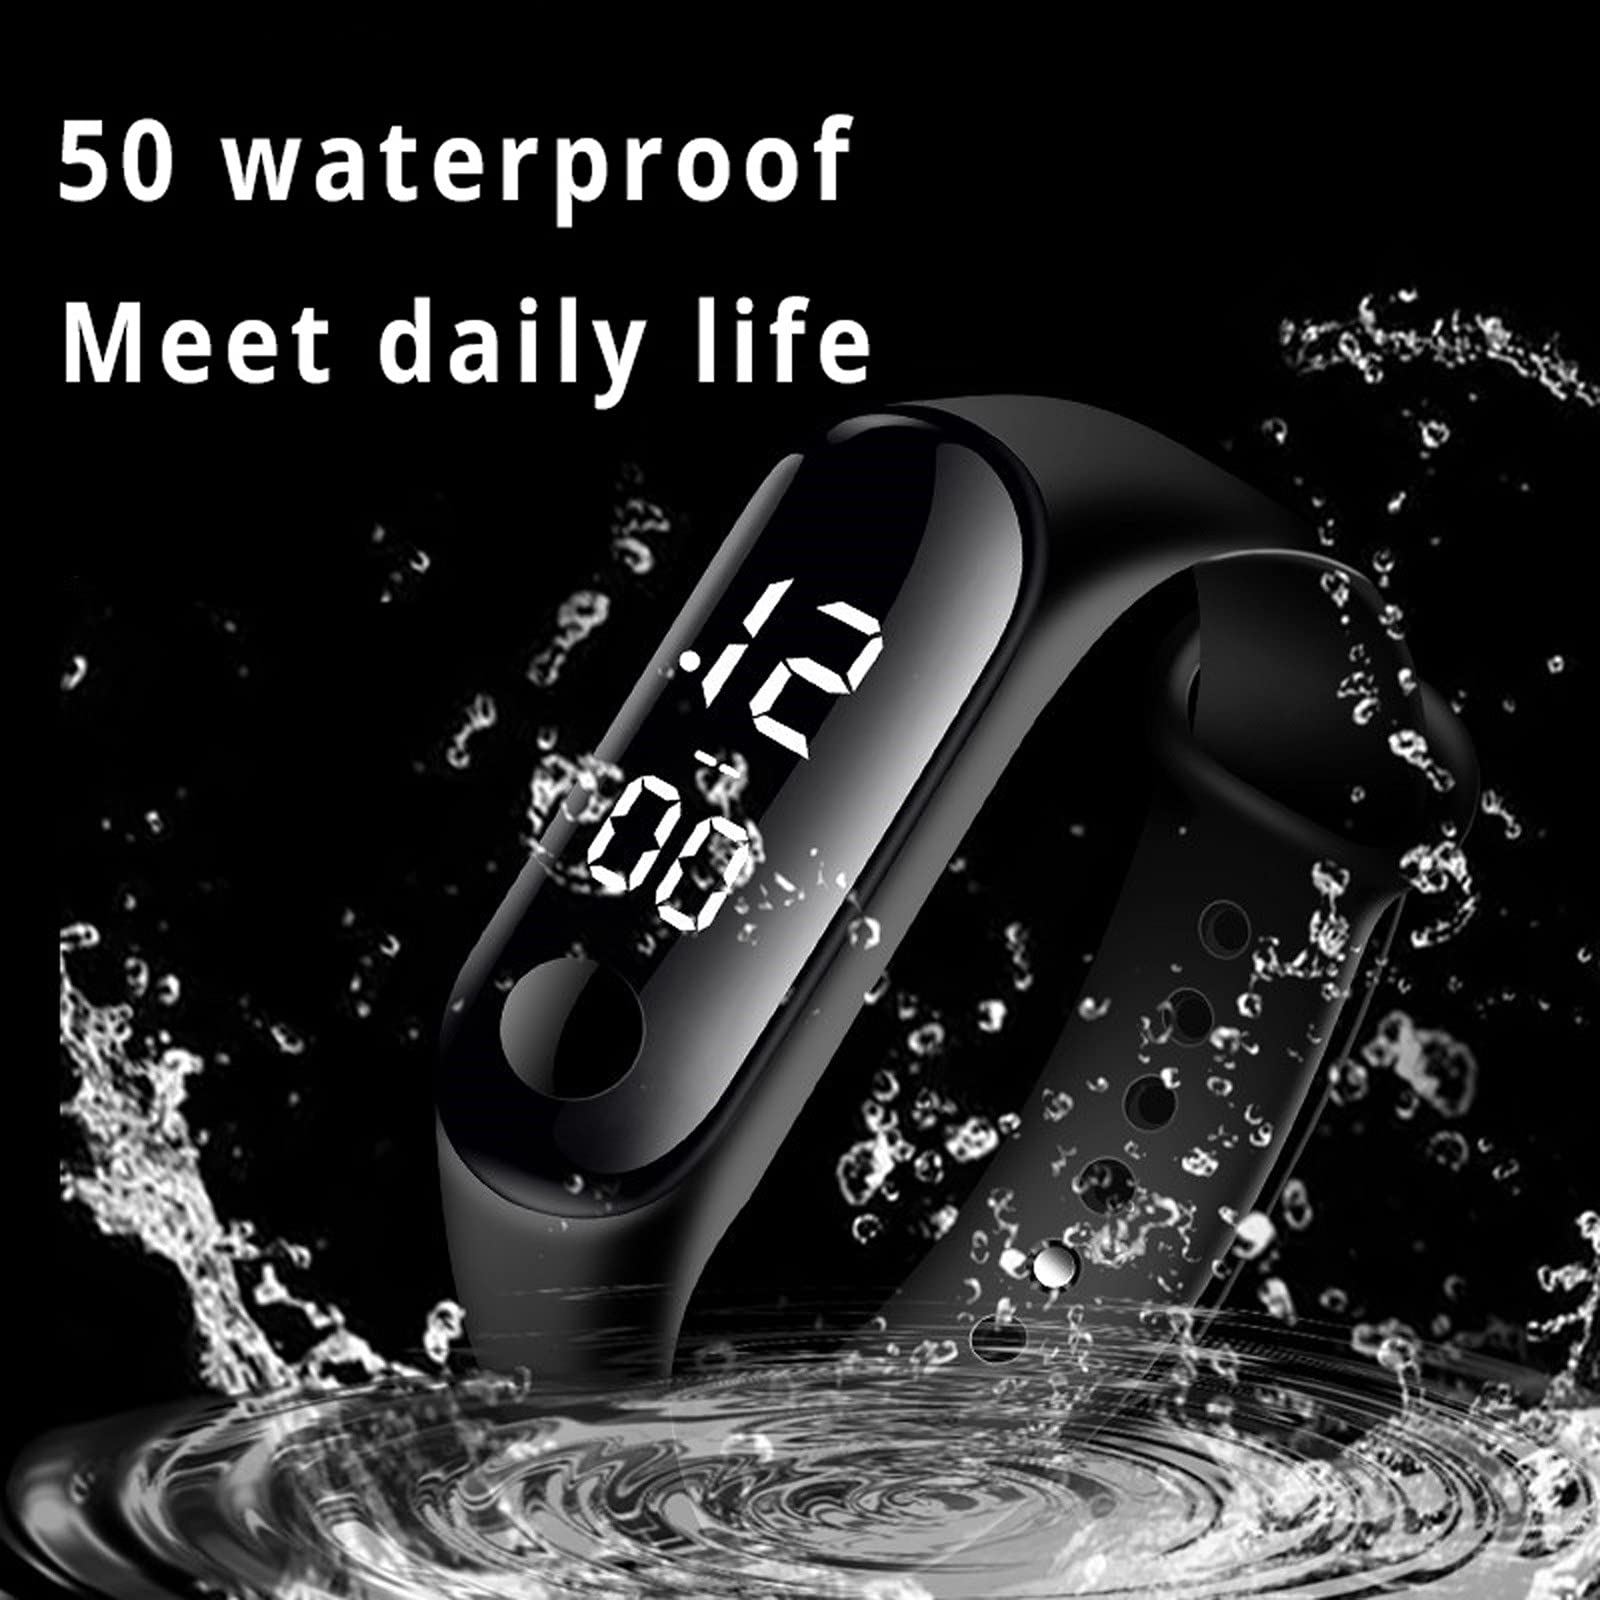 Mllkcao 1 Pcs Digital LED Sports Watch, Water-Proof Universal Watch Unisex Sport Watch Led Digital Silicone Strap Creative Hand Ring Electronic Watch, Red